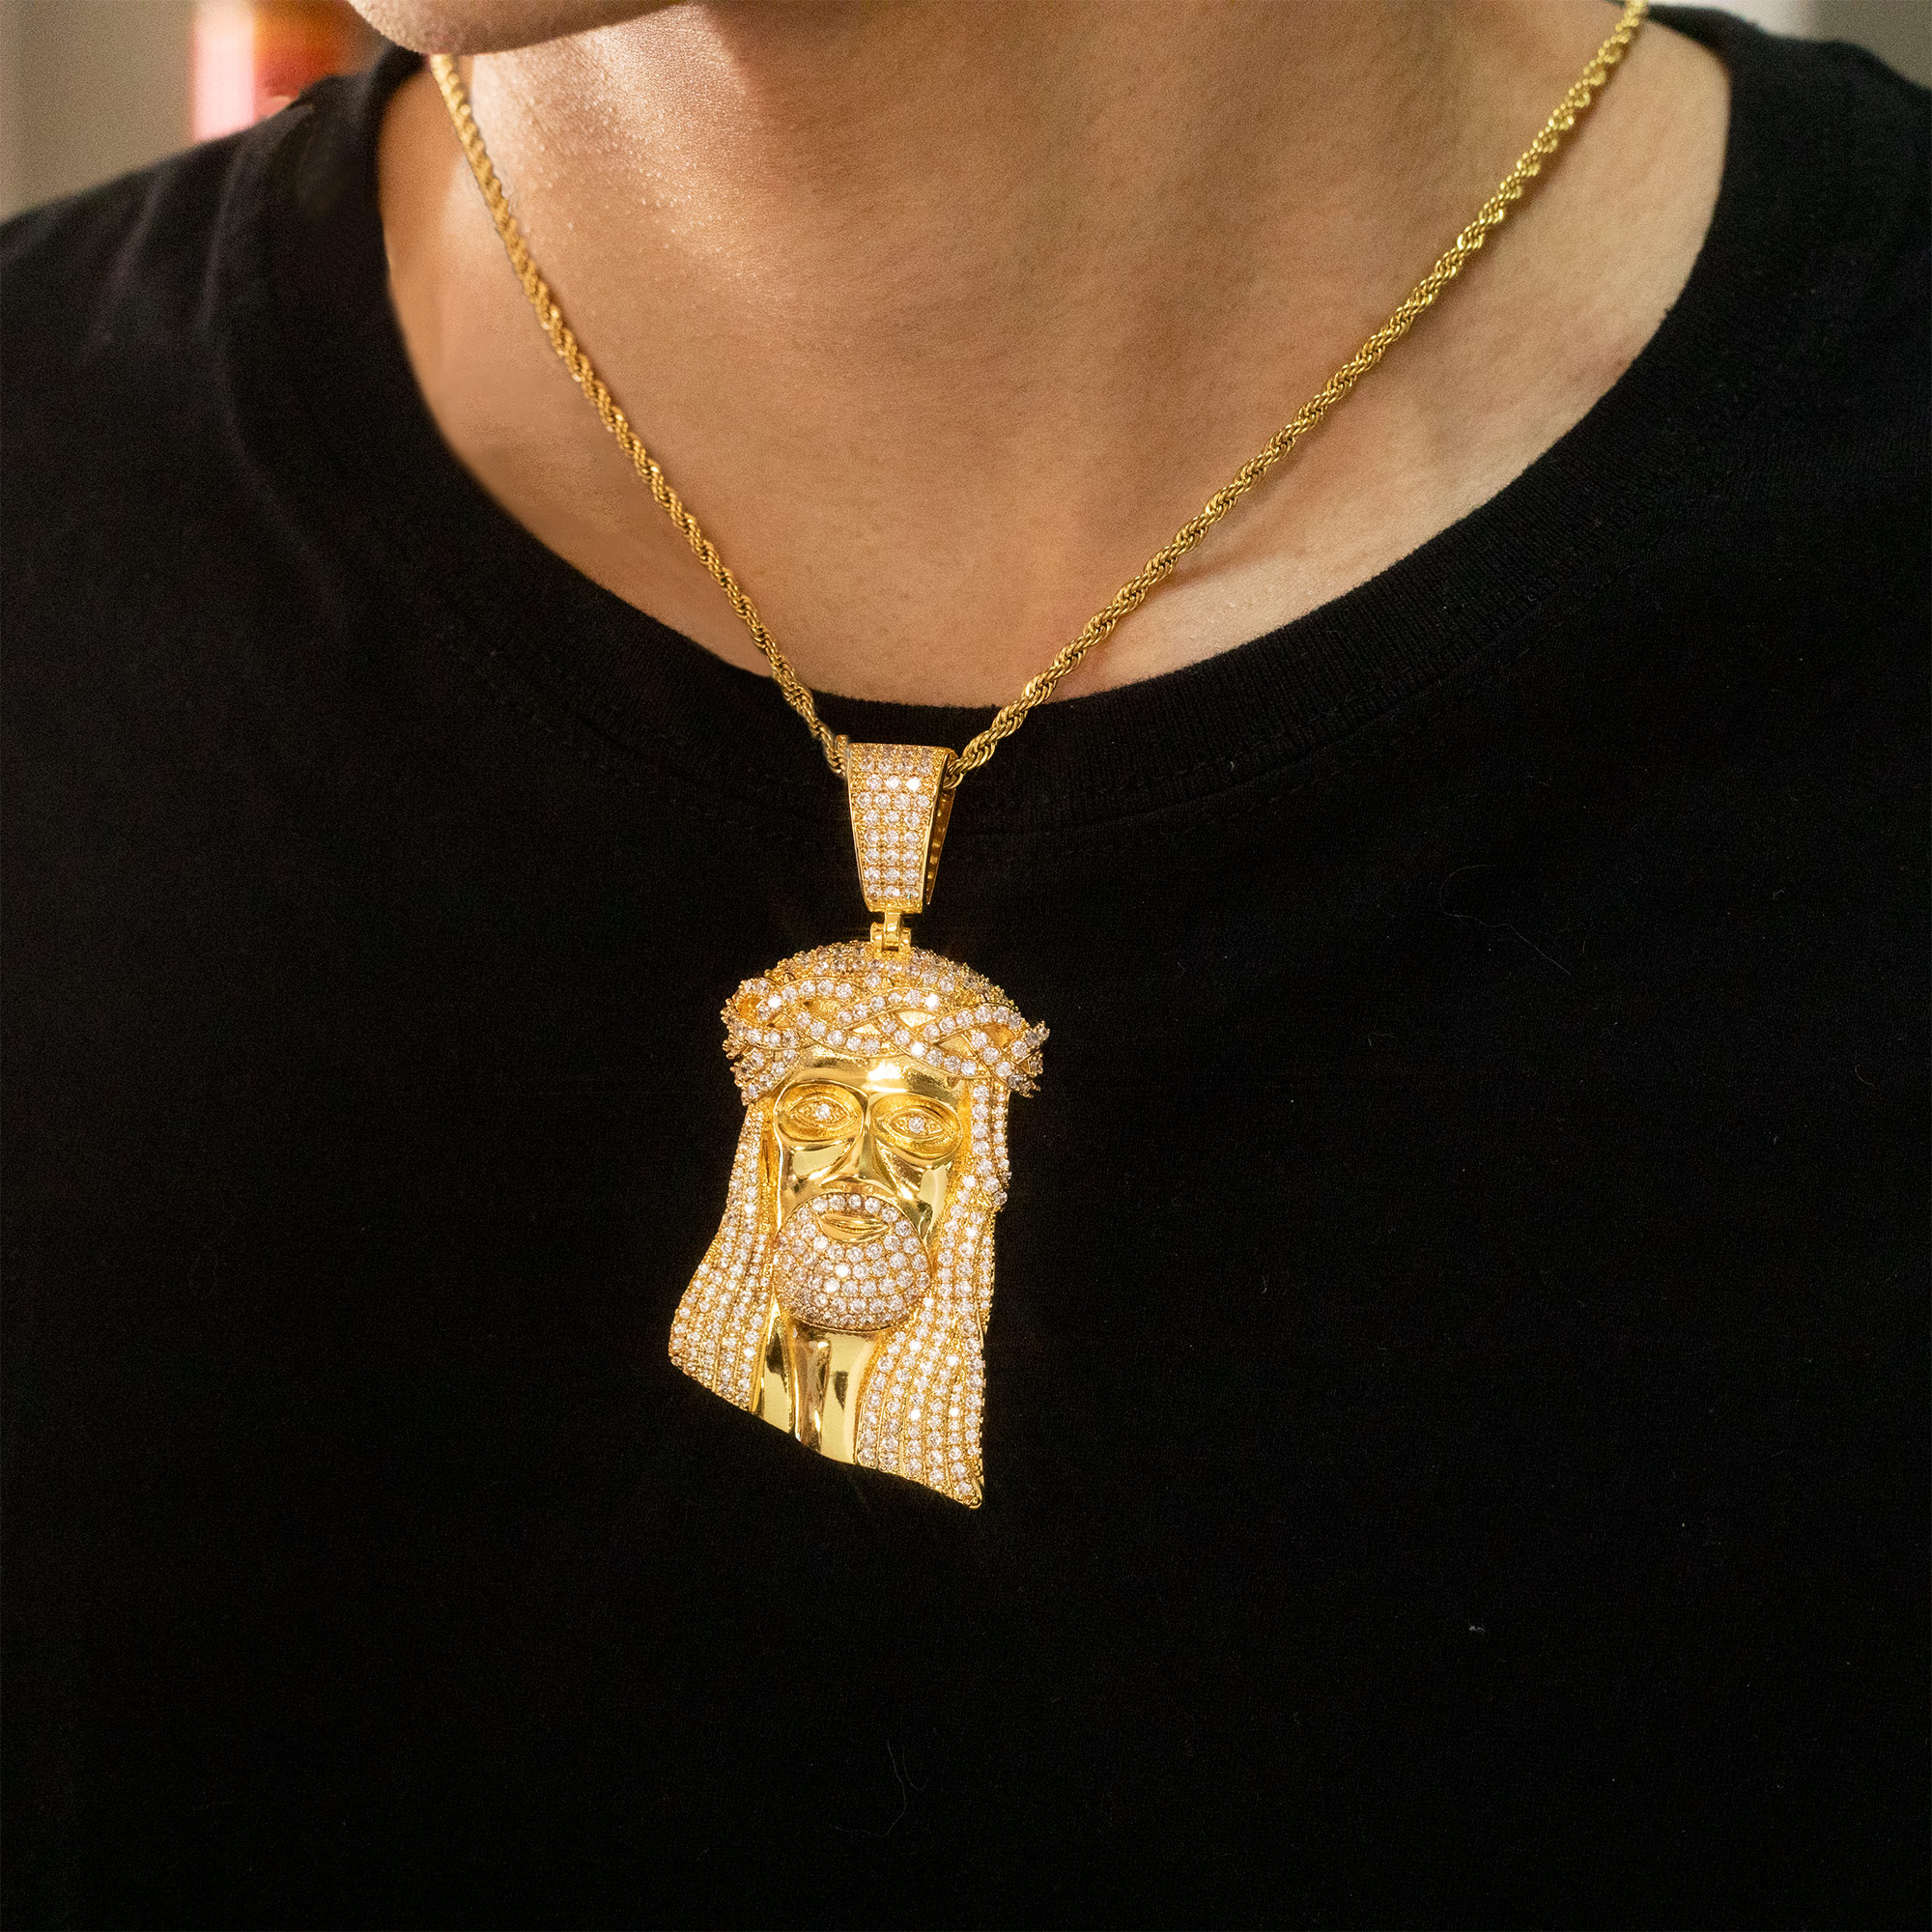 lced Out Golden Silver Saint Statue Necklace Pendant Set Sulludd